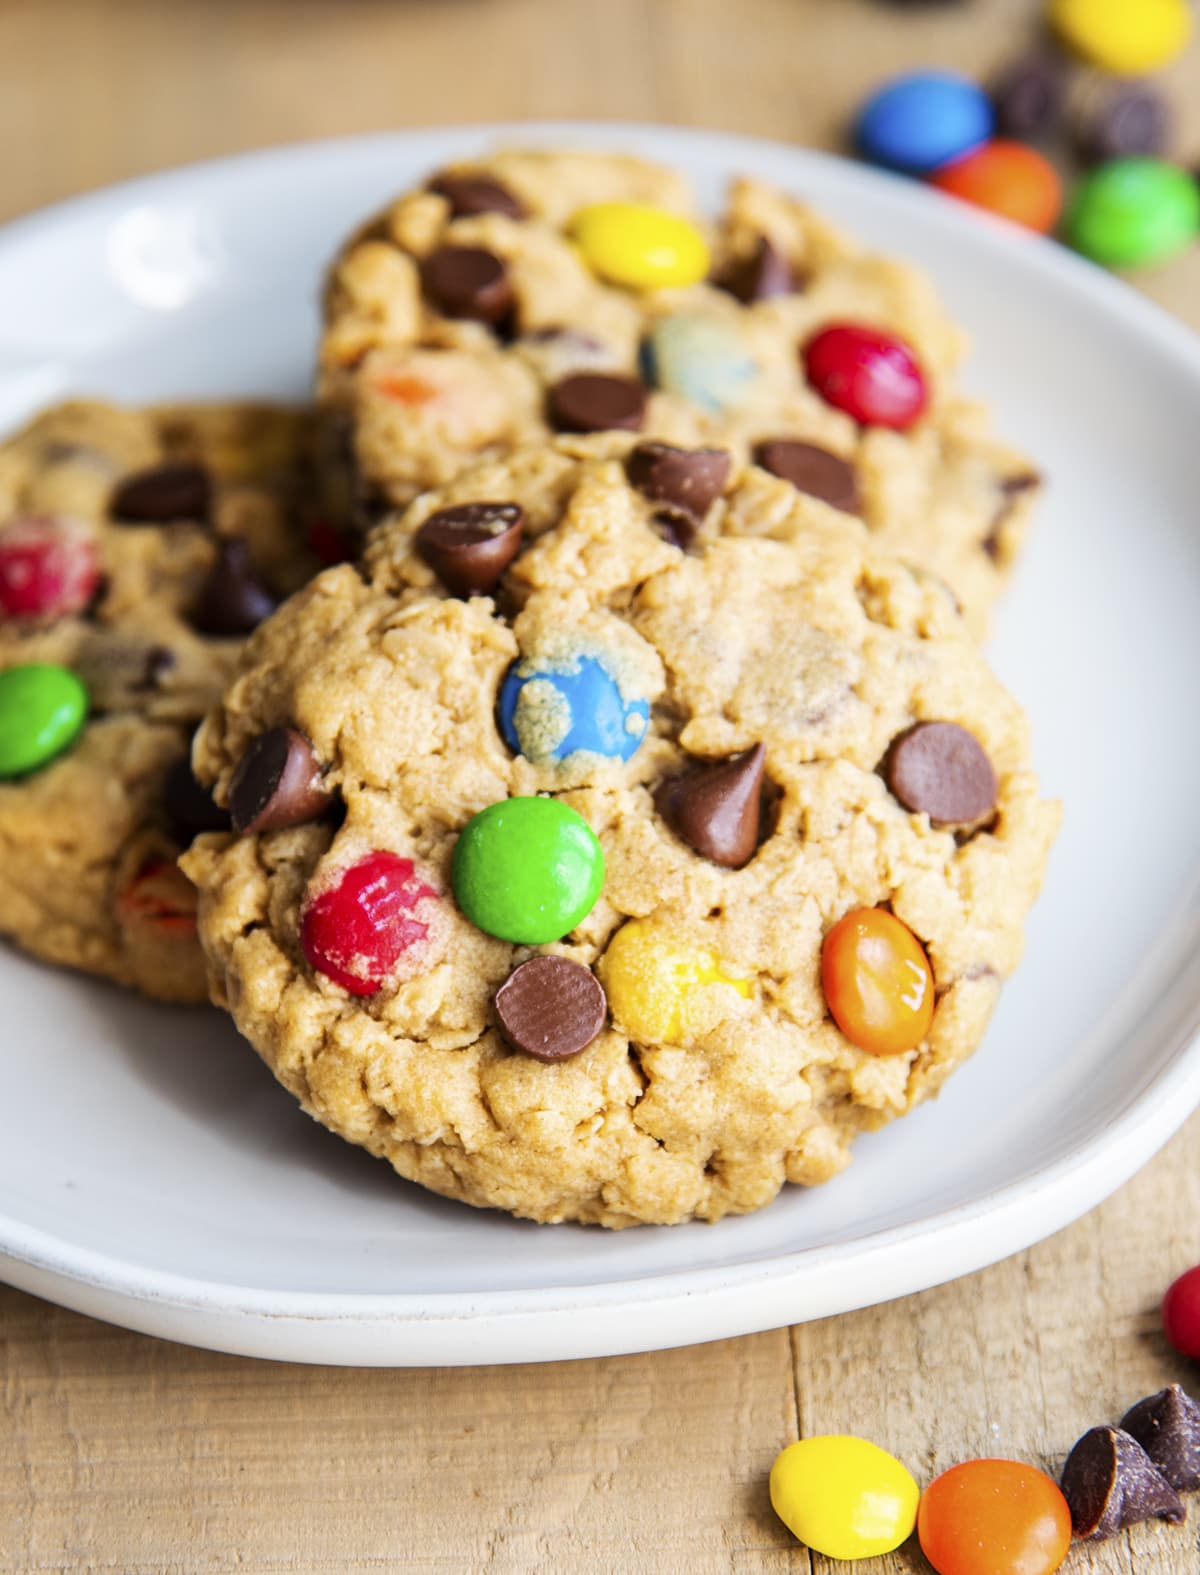 Three monster cookies with chocolate chips and m&ms on a plate.